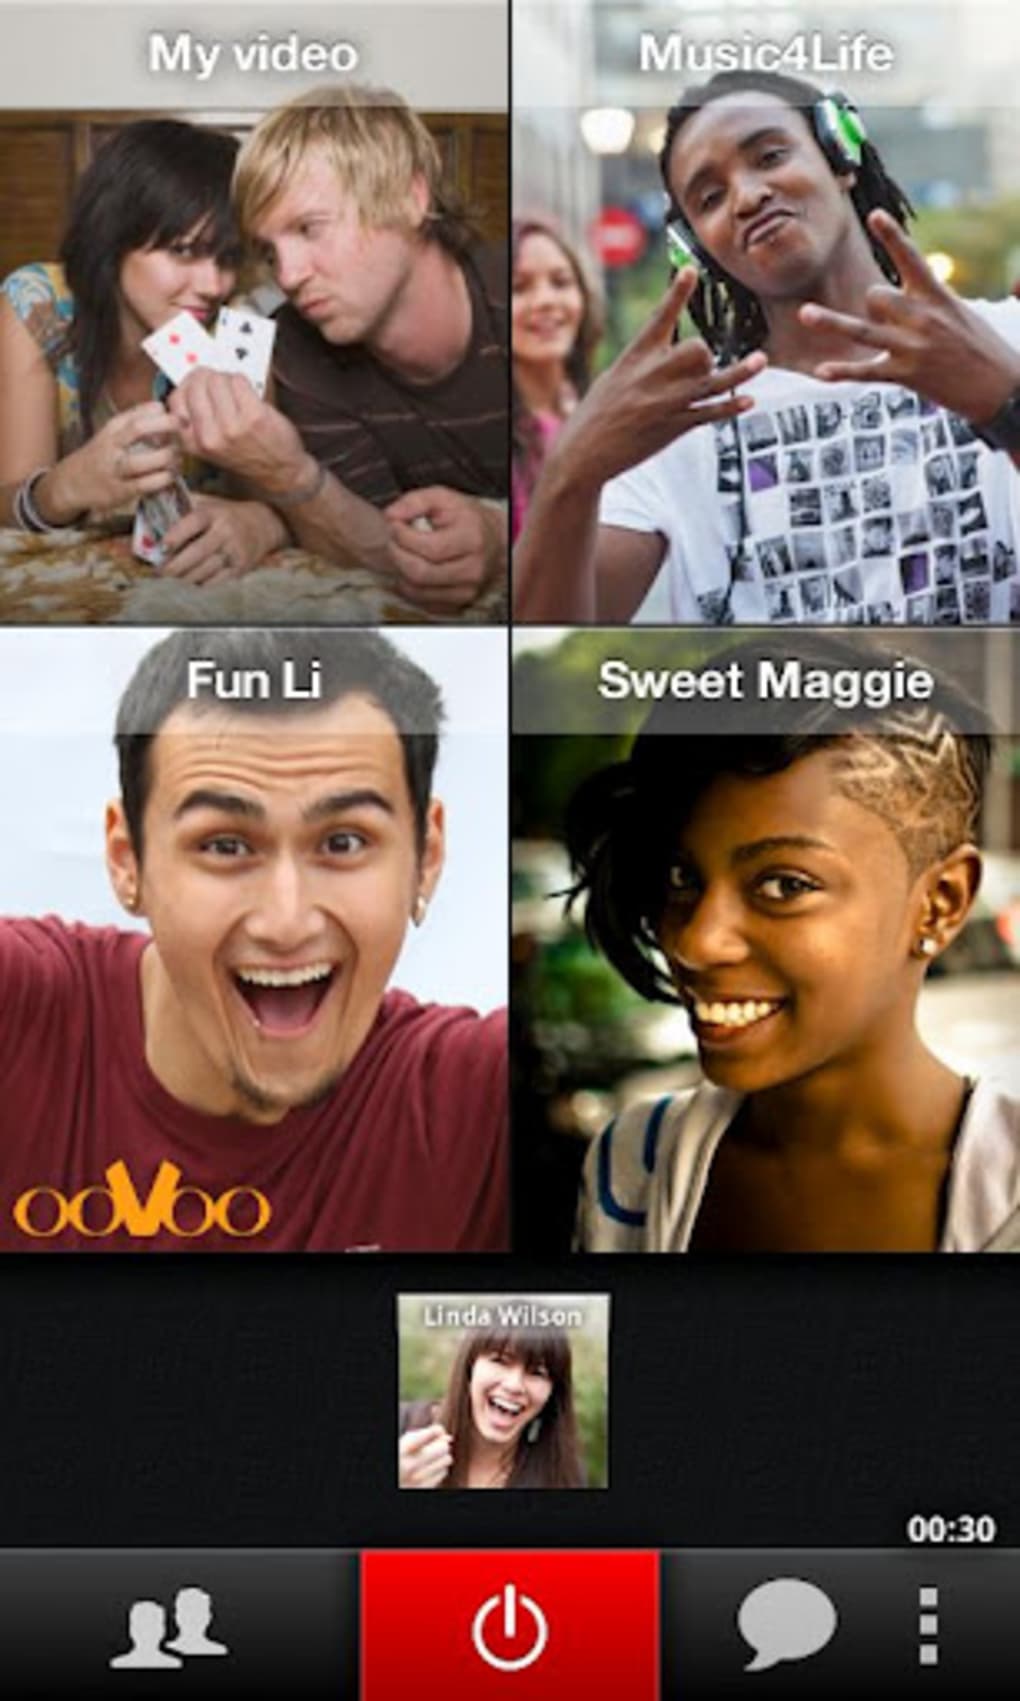 oovoo free download iphone 4